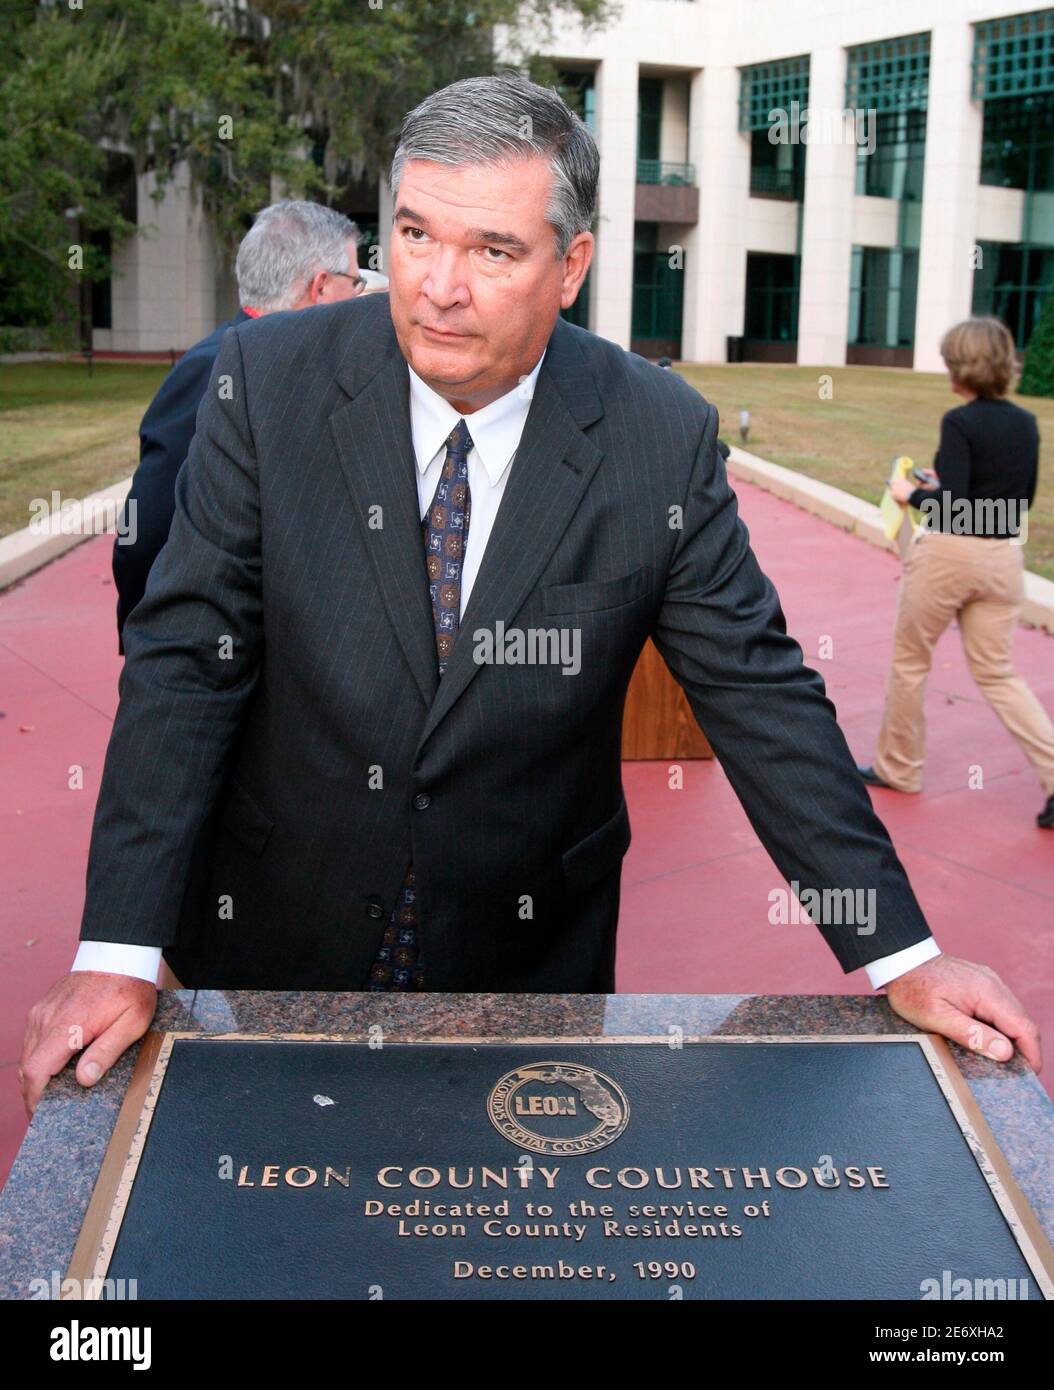 Florida State Attorney Mark Ober, appointed by Florida Governor Jeb Bush to prosecute the Martin Lee Anderson case, speaks to reporters before a news conference in front of the Leon County Florida Courthouse November 28, 2006 after charges were filed against seven guards and one nurse in Bay County Florida for the aggravated manslaughter of 14-year-old Martin Lee Anderson at the Bay County Florida juvenile boot camp in January 2006.  REUTERS/Mark Wallheiser (UNITED STATES) Stock Photo